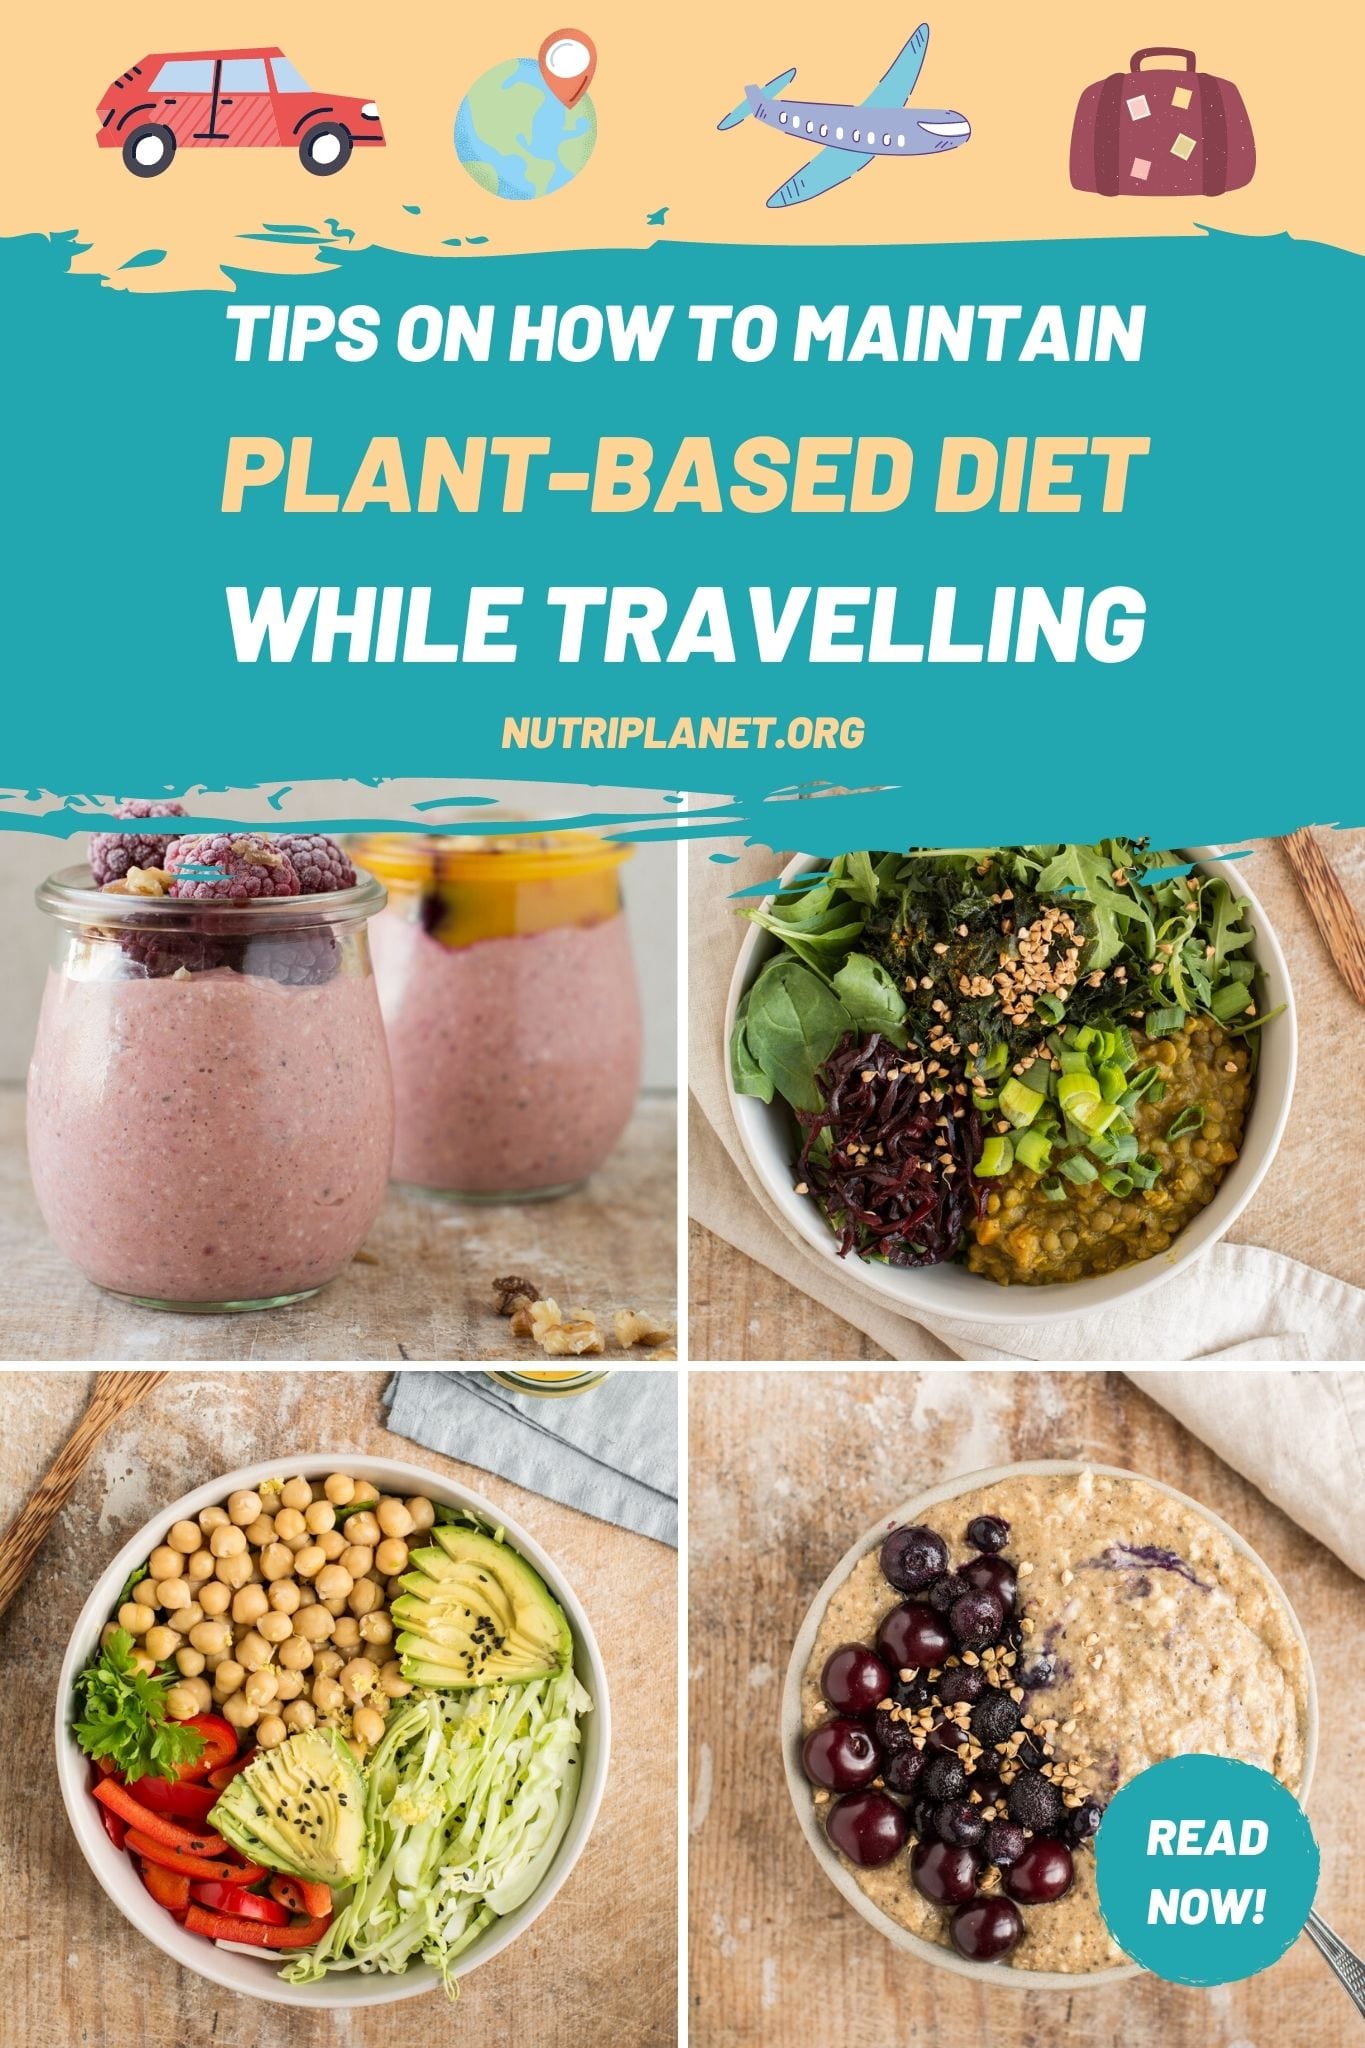 Easy tips on how to eat plant-based diet while travelling. 